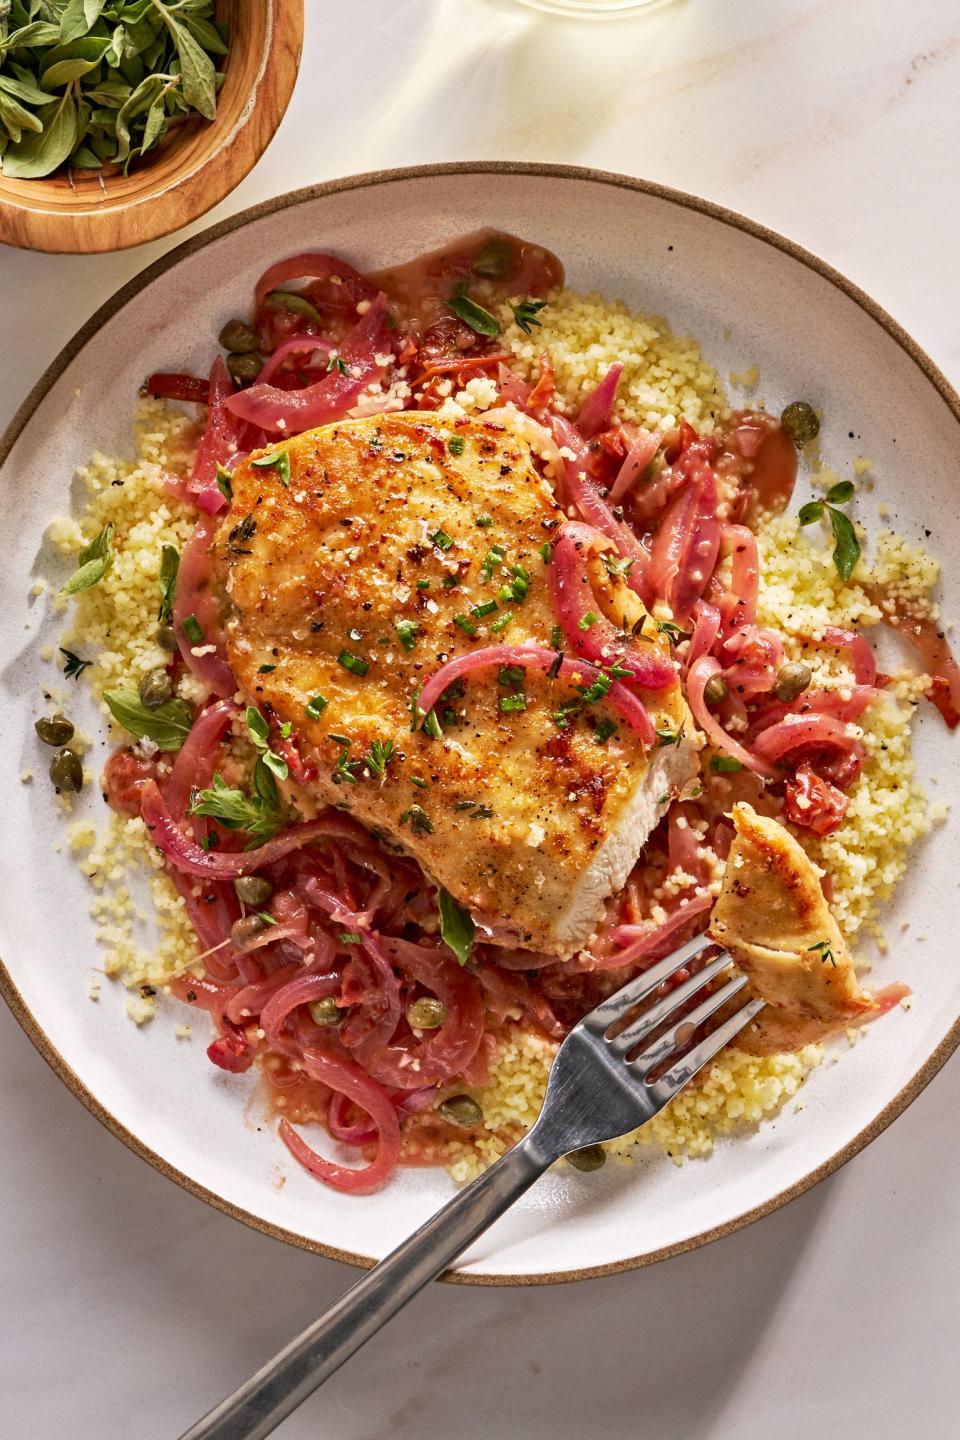 <p>We know what you're thinking: How exciting can <a href="https://www.delish.com/chicken-breast-recipes/" rel="nofollow noopener" target="_blank" data-ylk="slk:chicken breasts;elm:context_link;itc:0;sec:content-canvas" class="link ">chicken breasts</a> be? As it turns out, pretty exciting, actually. Plus, the fact that these chicken breast recipes also happen to be healthy too is really the cherry on top of the cake. Admittedly, Team Delish is solidly very much about <a href="https://www.delish.com/cooking/g2133/chicken-thighs/" rel="nofollow noopener" target="_blank" data-ylk="slk:chicken thighs;elm:context_link;itc:0;sec:content-canvas" class="link ">chicken thighs</a>, but these healthy (yet still super-satisfying) chicken breast recipes have us rethinking our allegiance, especially if <a href="https://www.delish.com/cooking/recipe-ideas/a43031875/bbq-chicken-salad-recipe/" rel="nofollow noopener" target="_blank" data-ylk="slk:BBQ chicken salad;elm:context_link;itc:0;sec:content-canvas" class="link ">BBQ chicken salad</a> is what's for dinner tonight!</p><p>When it comes to healthy eating, we think it's key to keep boredom at bay. Chicken breasts can often get a bad rap, but they're also the perfect blank canvas for endless flavor combos that would never come across as bland "health food." Personally, we can't get enough of the combo of chicken + any and all citrus. It's a light and bright way to add tons of flavor without feeling weighed down, as we did with our recipes for <a href="https://www.delish.com/cooking/recipe-ideas/recipes/a53792/chinese-chicken-salad-recipe/" rel="nofollow noopener" target="_blank" data-ylk="slk:crunchy Mandarin orange chicken salad;elm:context_link;itc:0;sec:content-canvas" class="link ">crunchy Mandarin orange chicken salad</a>, <a href="https://www.delish.com/cooking/recipe-ideas/a42676553/one-pan-coconut-lime-chicken-recipe/" rel="nofollow noopener" target="_blank" data-ylk="slk:one-pan coconut lime chicken;elm:context_link;itc:0;sec:content-canvas" class="link ">one-pan coconut lime chicken</a>, and <a href="https://www.delish.com/cooking/recipe-ideas/a37418665/skillet-chicken-and-potatoes-recipe/" rel="nofollow noopener" target="_blank" data-ylk="slk:skillet lemon lemon-herb chicken and potatoes;elm:context_link;itc:0;sec:content-canvas" class="link ">skillet lemon lemon-herb chicken and potatoes</a>.</p><p>Eating healthy also doesn't mean you have to give up those comfort food classics. Far from it! Case in point: our <a href="https://www.delish.com/cooking/recipe-ideas/a35256979/air-fryer-chicken-parmesan-recipe/" rel="nofollow noopener" target="_blank" data-ylk="slk:air-fryer chicken parm recipe;elm:context_link;itc:0;sec:content-canvas" class="link ">air-fryer chicken parm recipe</a>. It's truly unbelievable that something so crispy and indulgent-tasting doesn't use any oil. And don't get us started on our <a href="https://www.delish.com/cooking/recipe-ideas/a39818016/air-fryer-orange-chicken-recipe/" rel="nofollow noopener" target="_blank" data-ylk="slk:air-fryer orange chicken;elm:context_link;itc:0;sec:content-canvas" class="link ">air-fryer orange chicken</a>. It's sweet and savory just like the mall food court classic, but just a tiny bit better for you.</p><p>If you're on a healthy eating kick, check out all of our favorite <a href="https://www.delish.com/cooking/recipe-ideas/g3733/healthy-dinner-recipes/" rel="nofollow noopener" target="_blank" data-ylk="slk:healthy dinner recipes;elm:context_link;itc:0;sec:content-canvas" class="link ">healthy dinner recipes</a> next! <br></p>